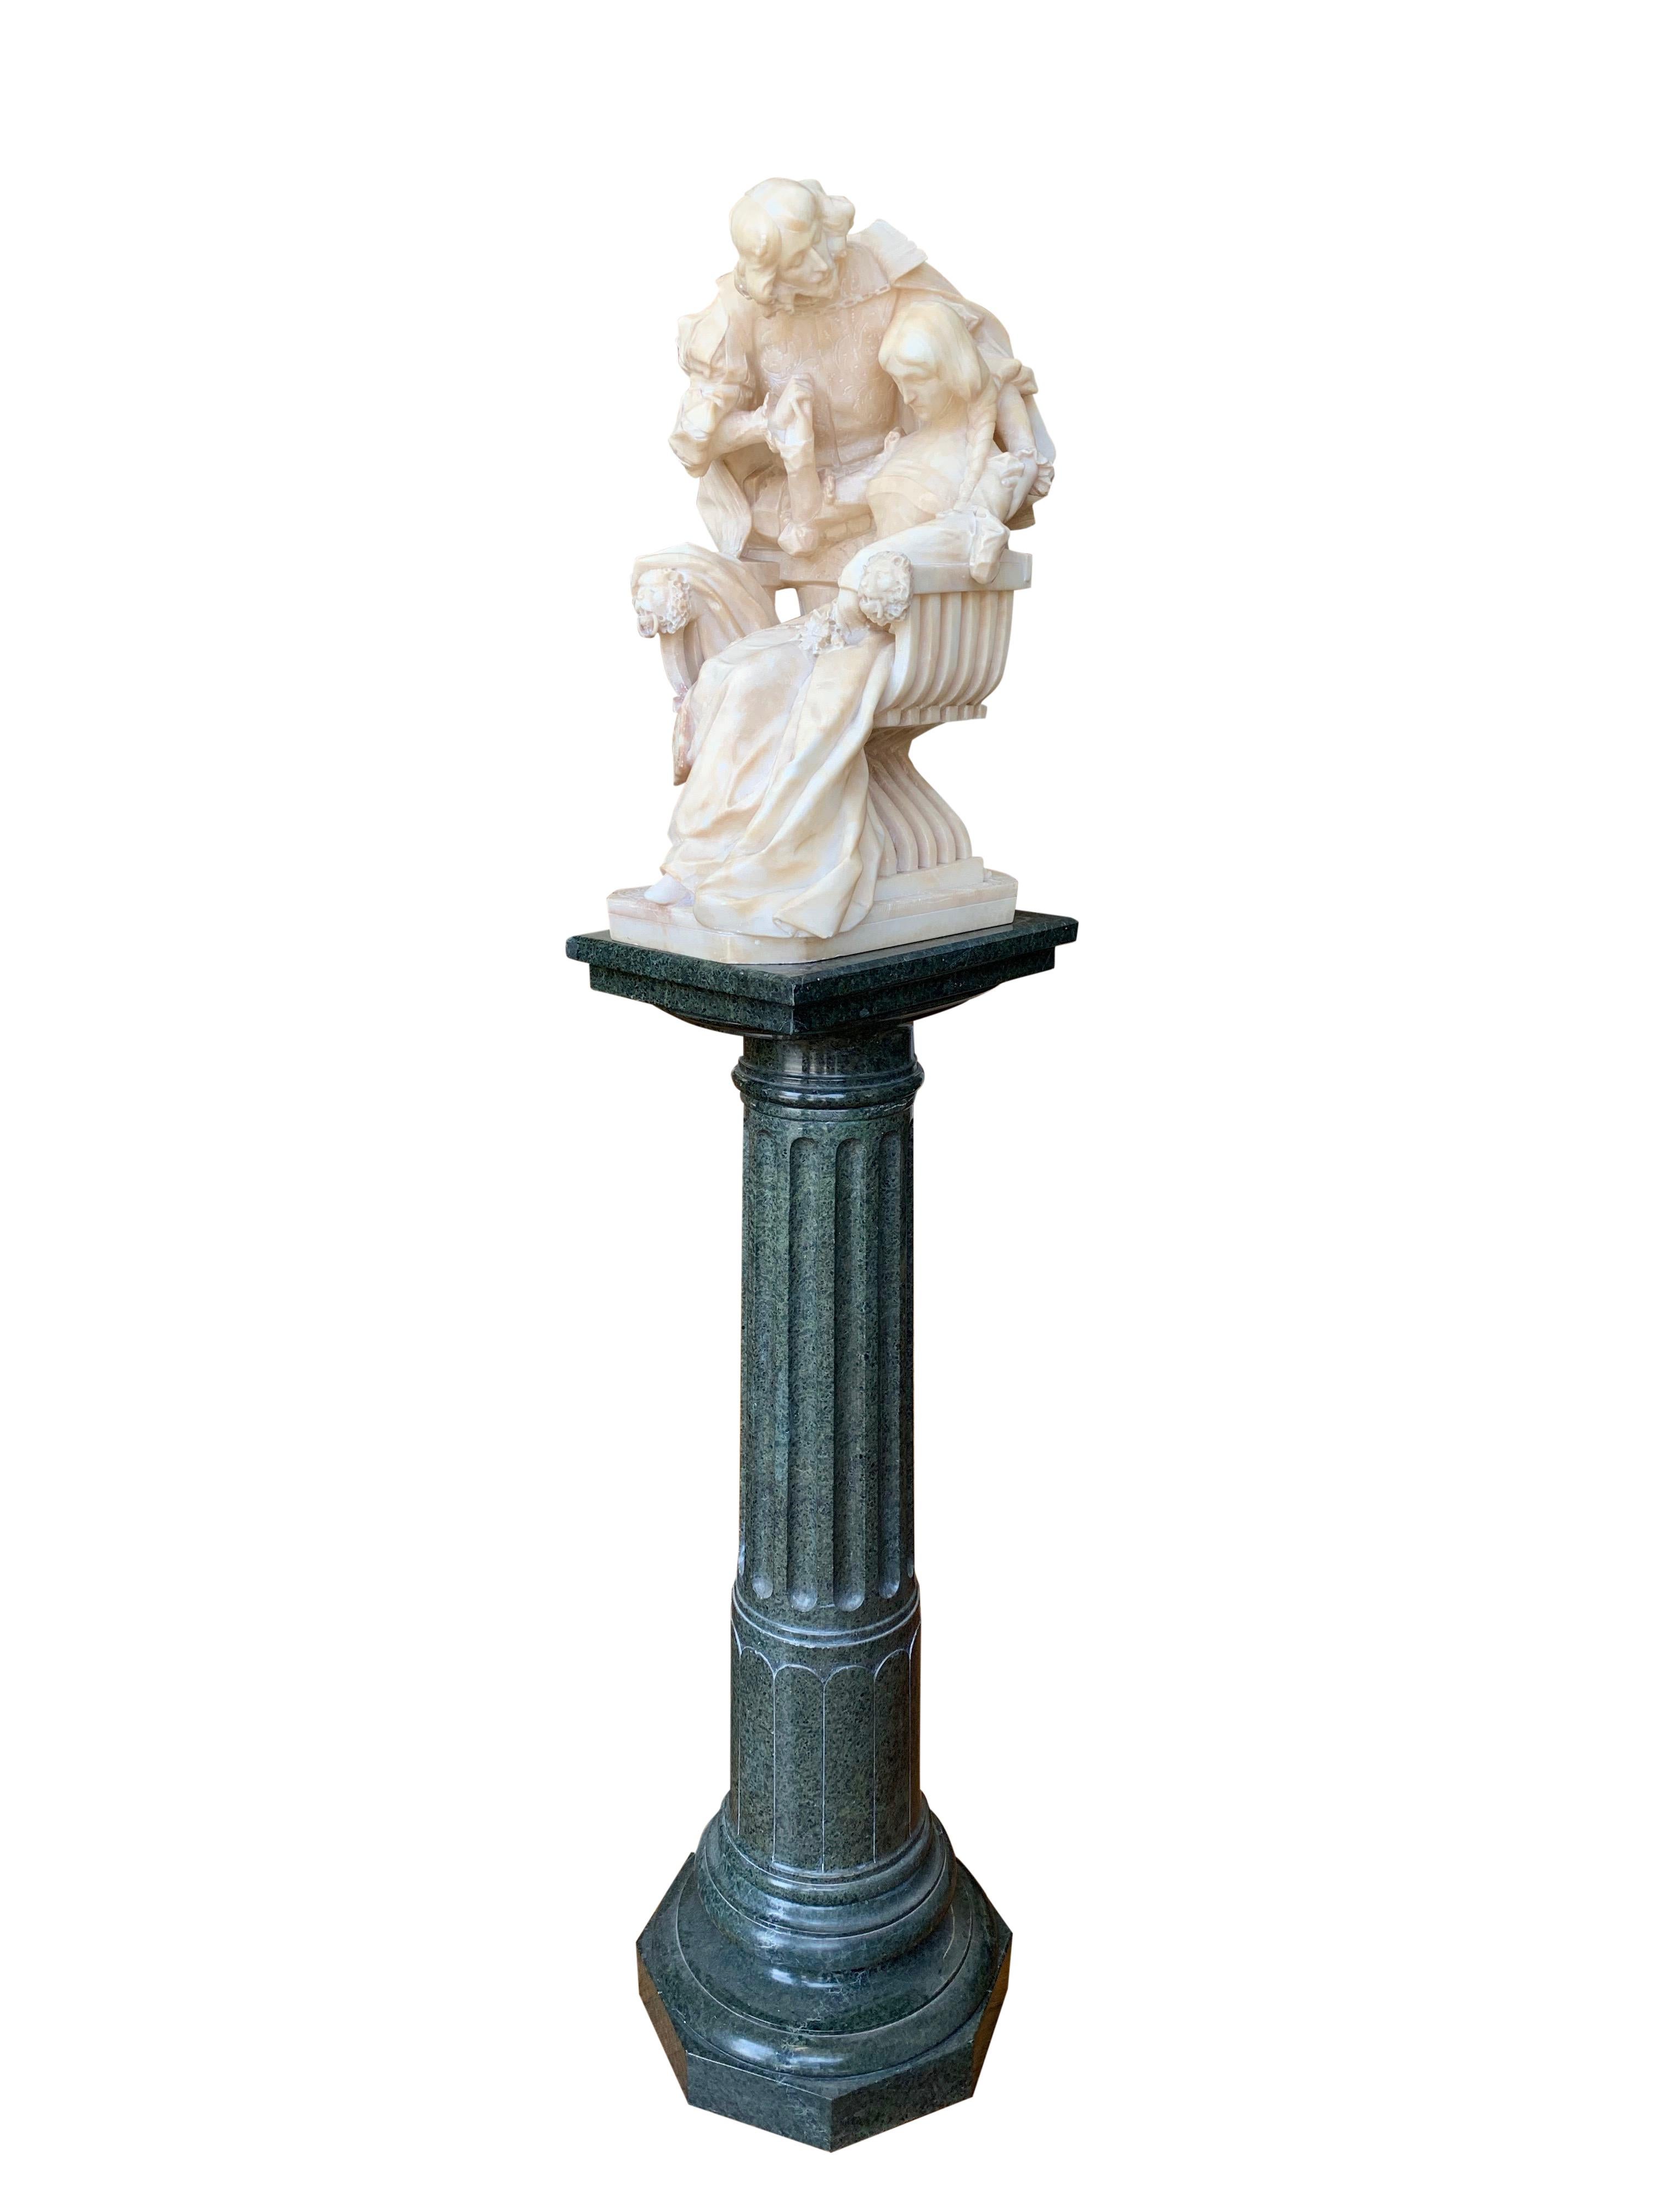 Superbly carved 19th century Italian alabaster group depicting a cavalier standing aside a sitting lady with a flower in hand. Raised on a green marble pedestal with a rectangular top and octagonal base,

circa 1880

Measures: Height with